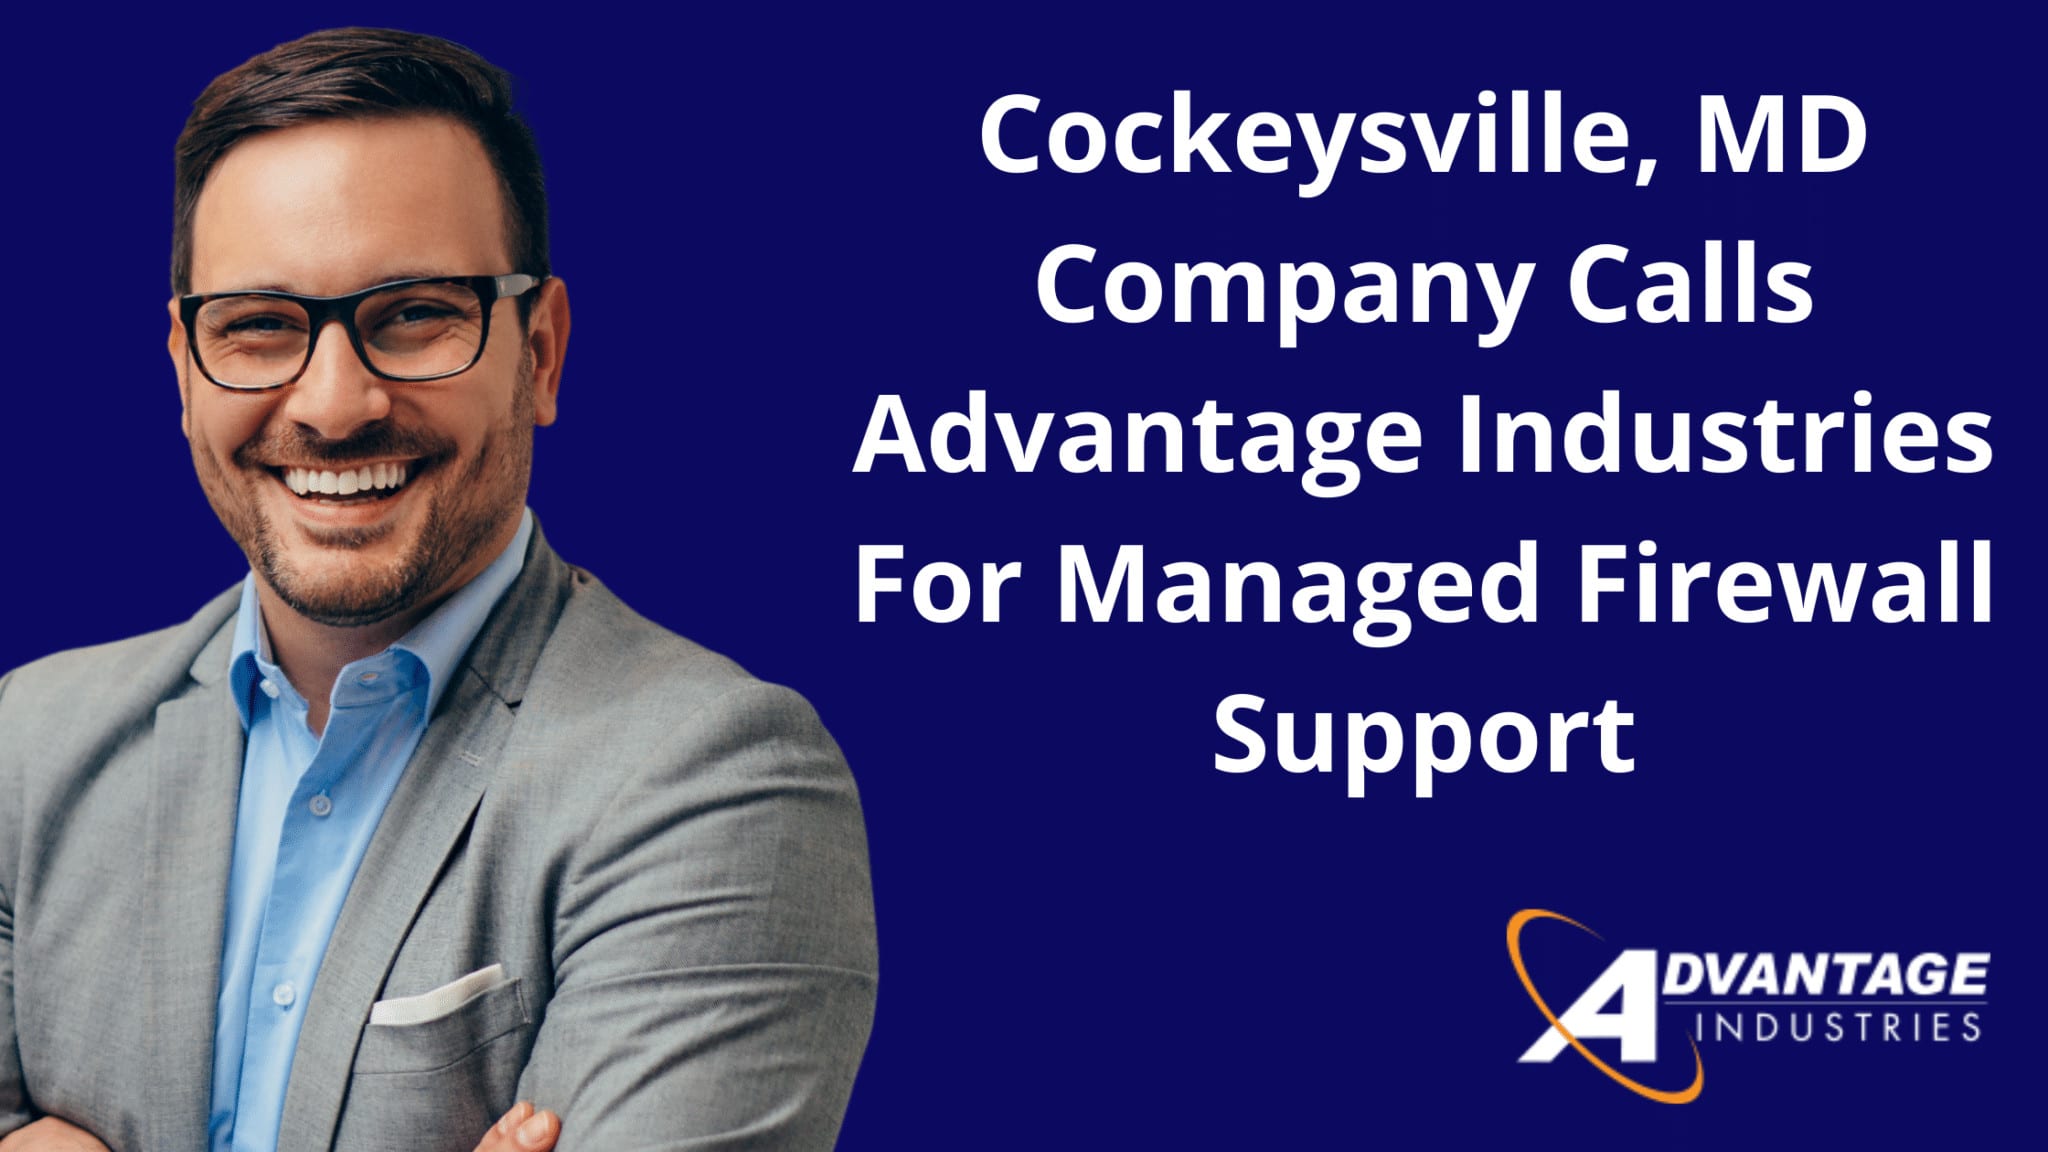 Cockeysville, MD Company Calls Advantage Industries For Managed Firewall Support